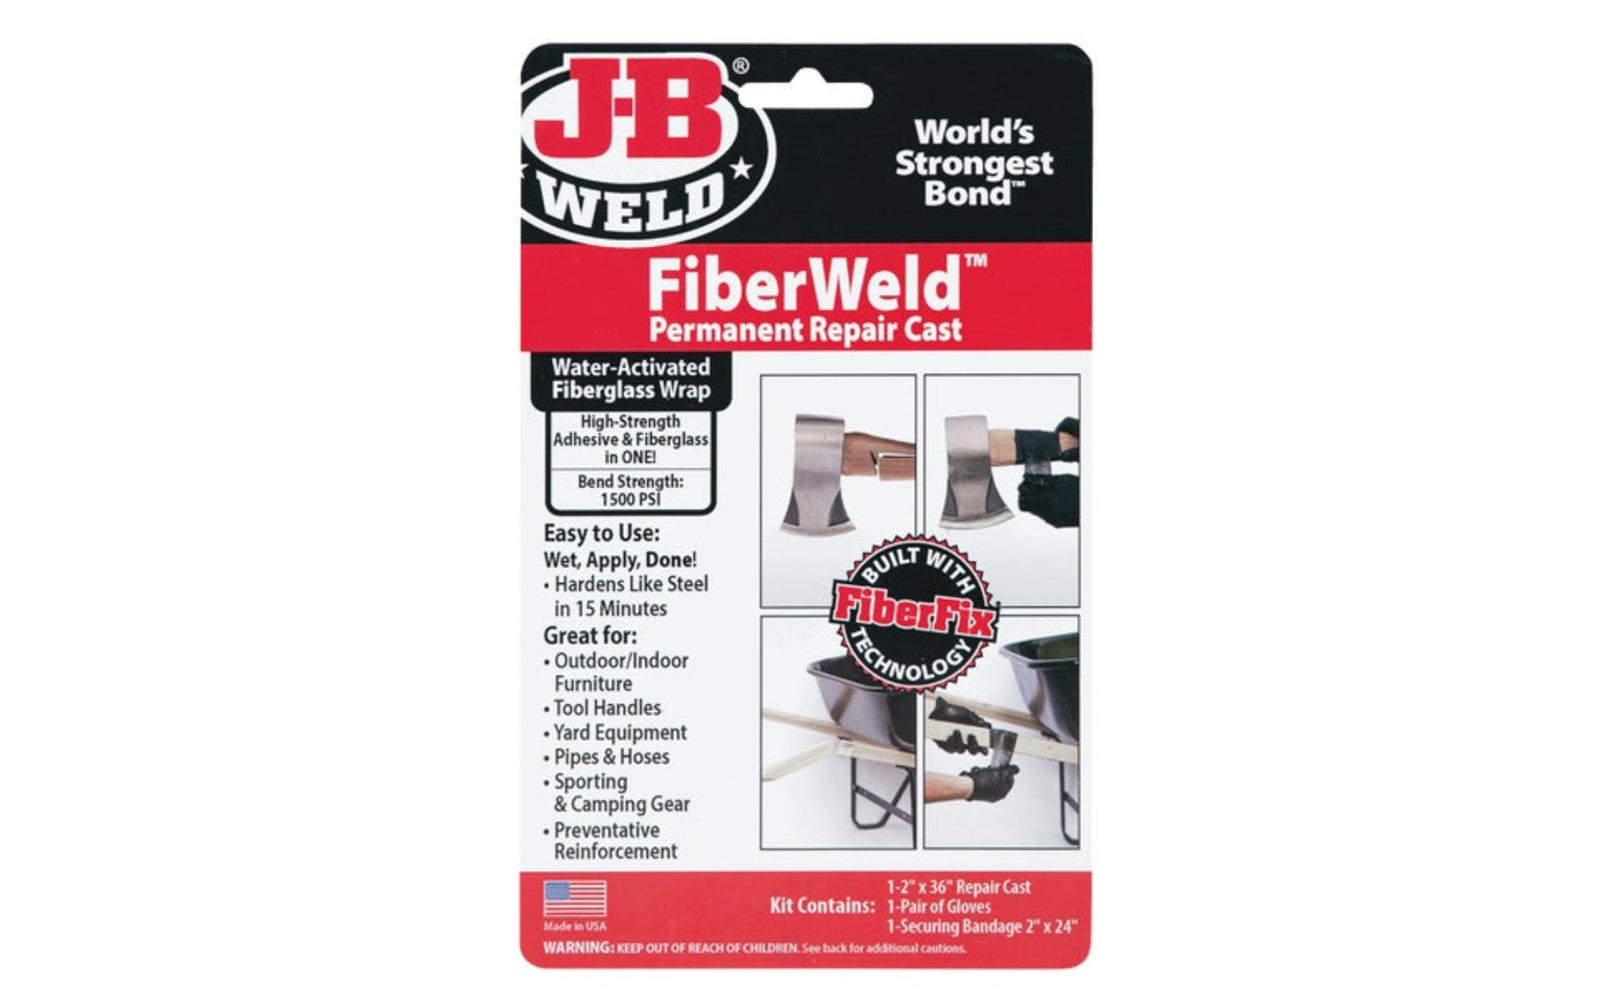 J-B Weld FiberWeld Permament Repair Cast. FiberFix combines industrial strength fiber and specialized resin into a wrap that will bond to almost anything, hardens like steel, and provides a permanent fix. 2" width x 36" length. JB Weld Model 38236.